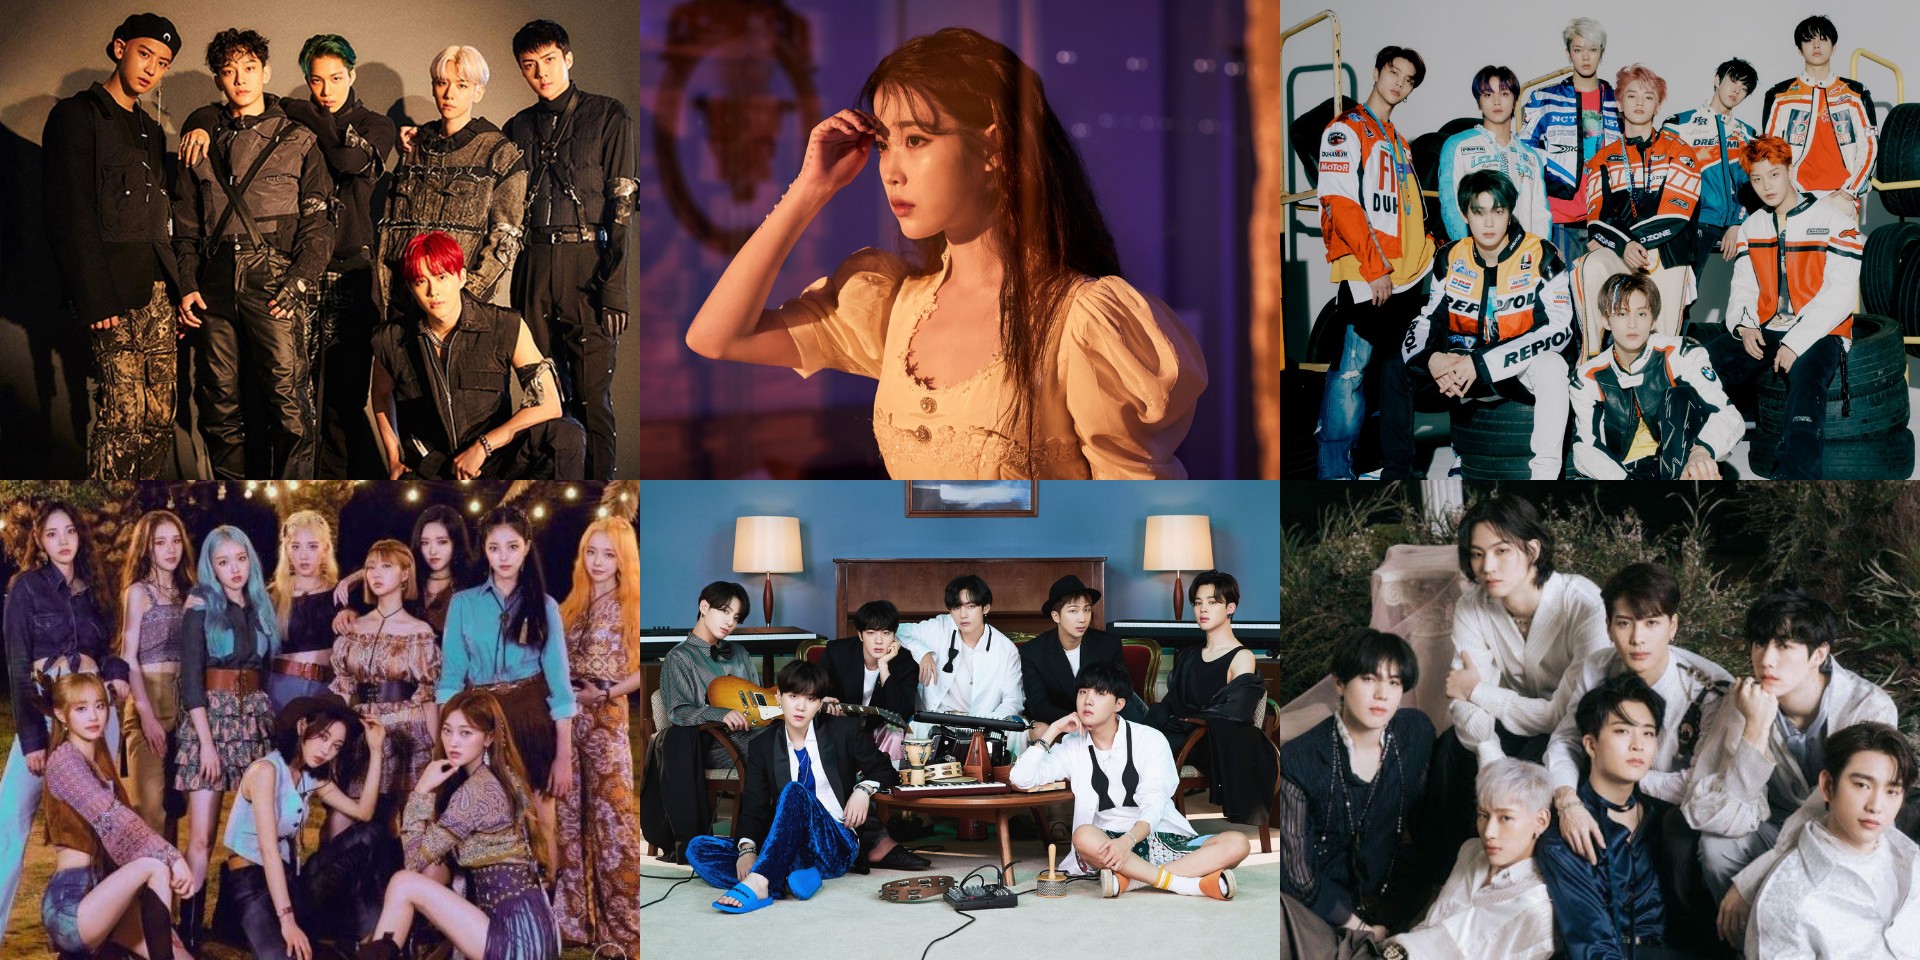 Here are the winners of the 35th Golden Disc Awards - BTS, EXO, GOT7, IU, LOONA, NCT 127, and more